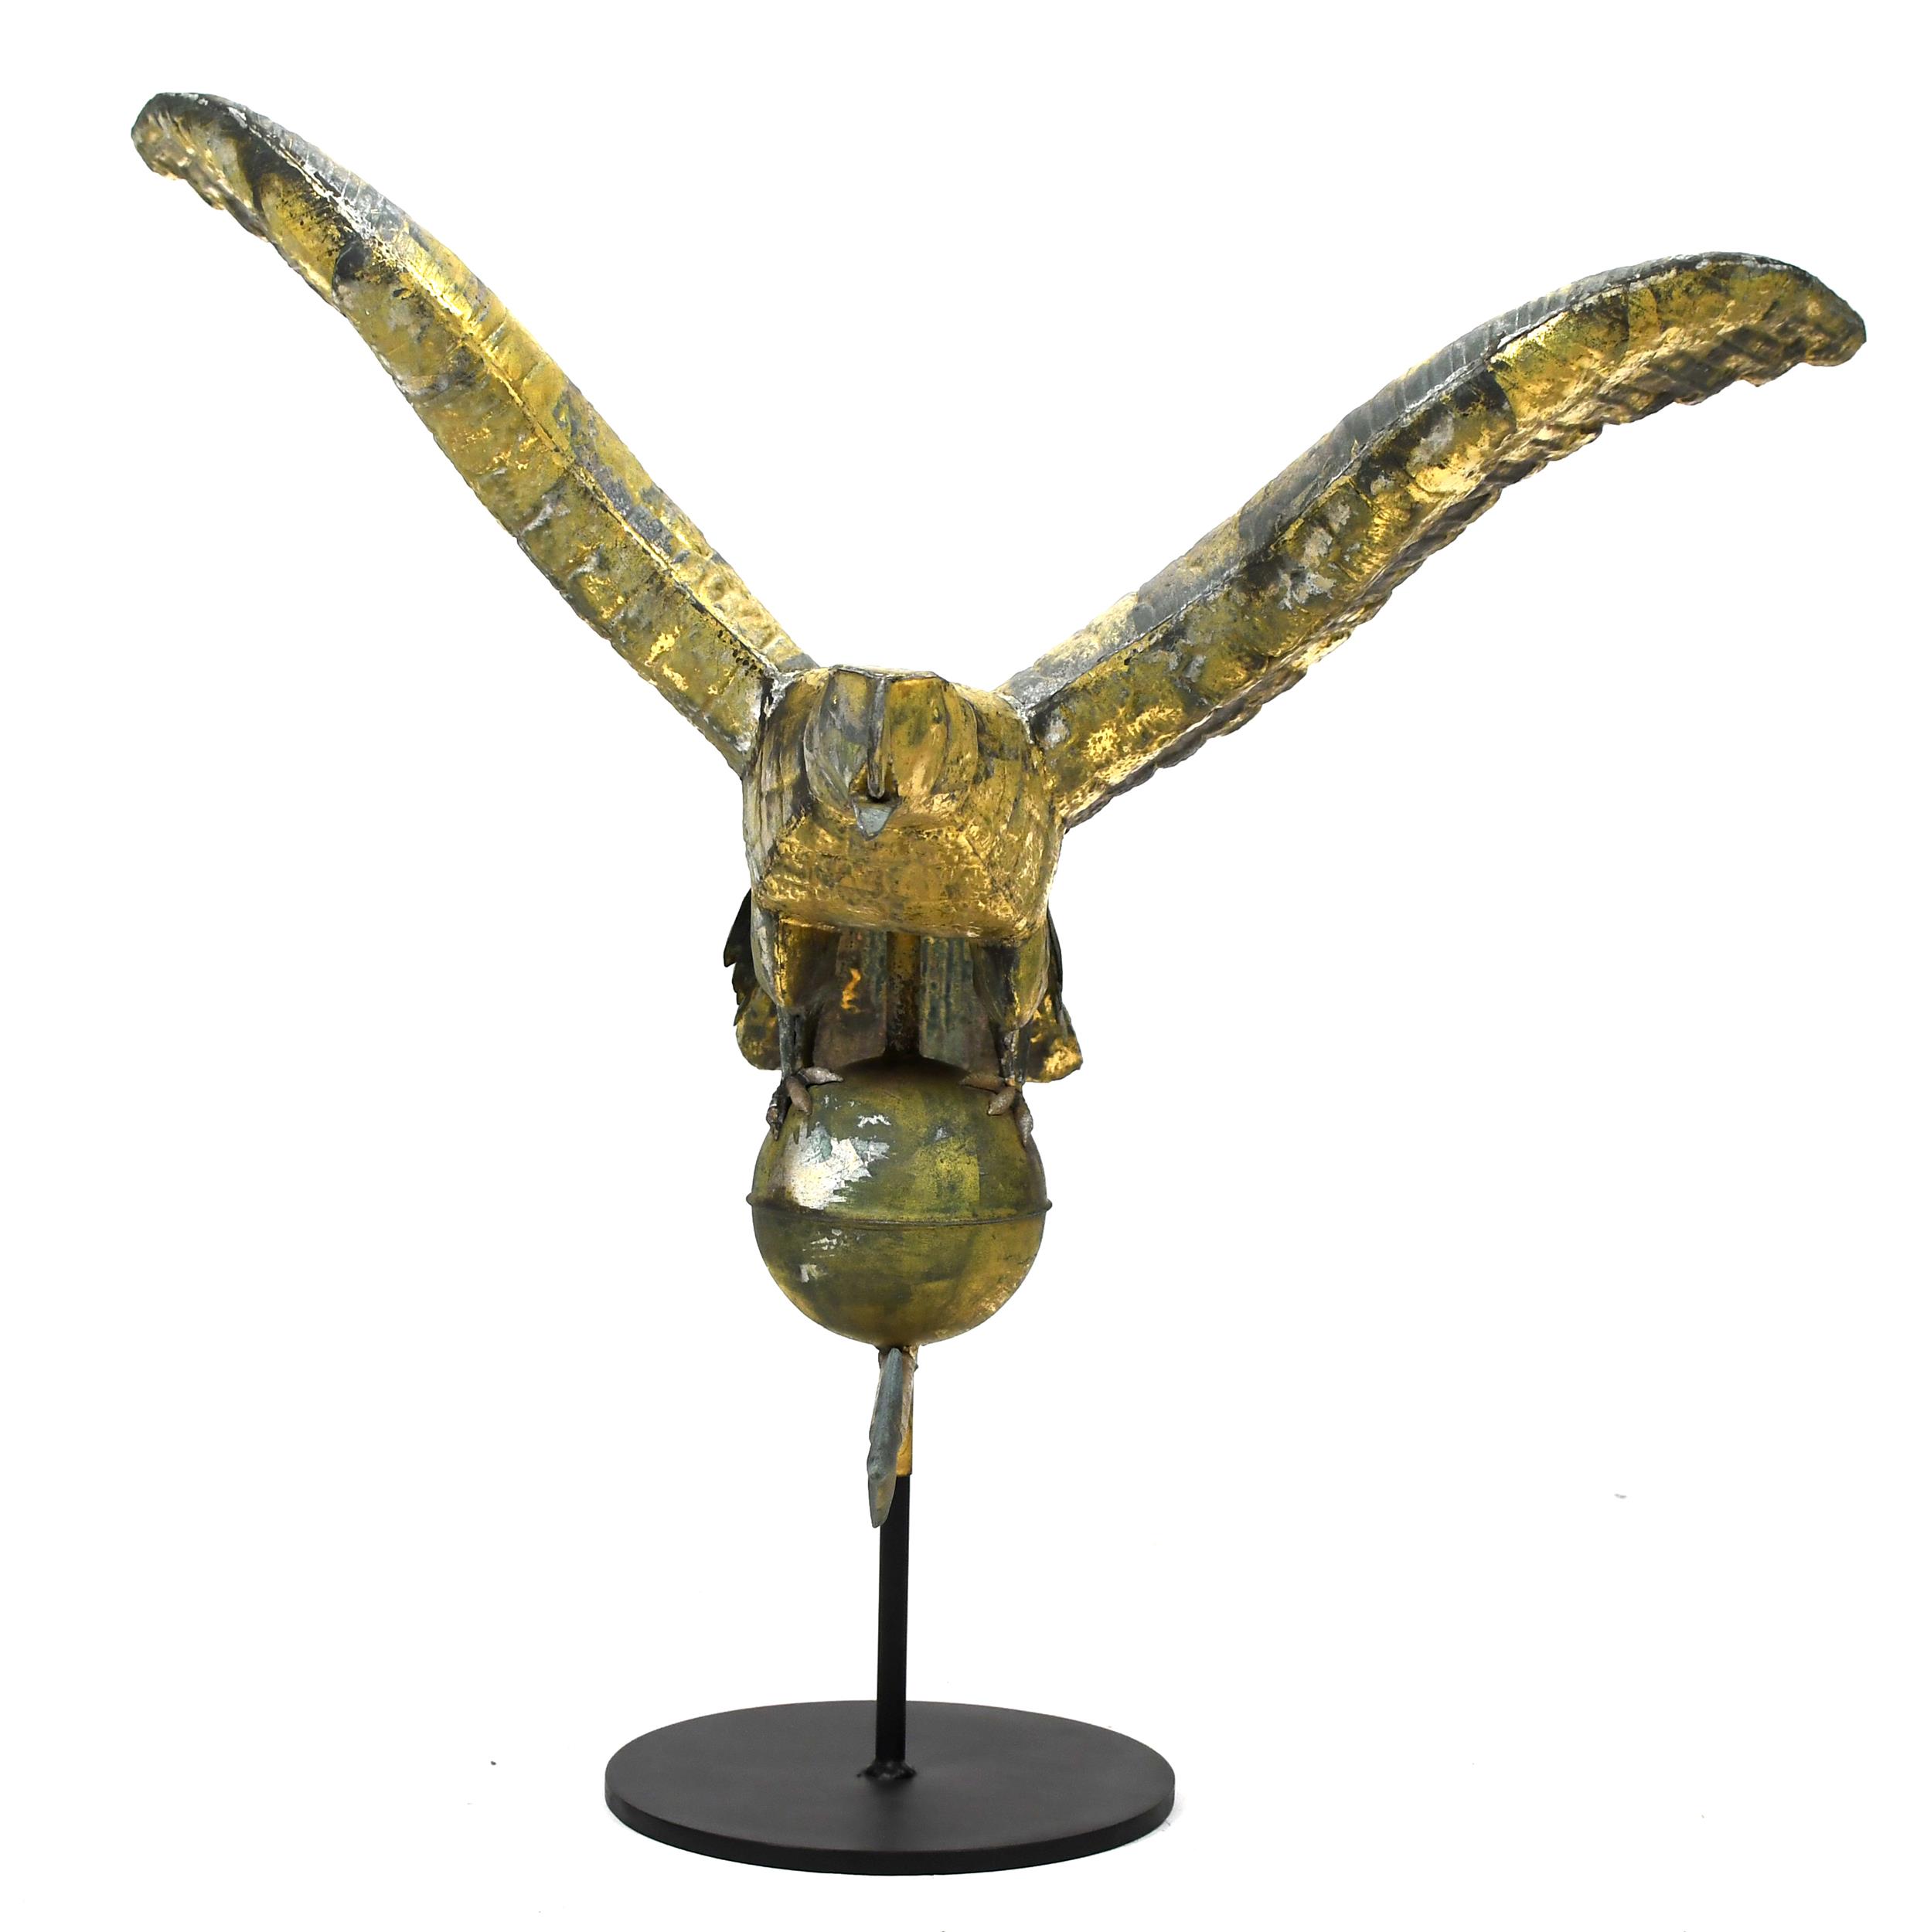 EXCEPTIONAL LARGE 19TH C. EAGLE